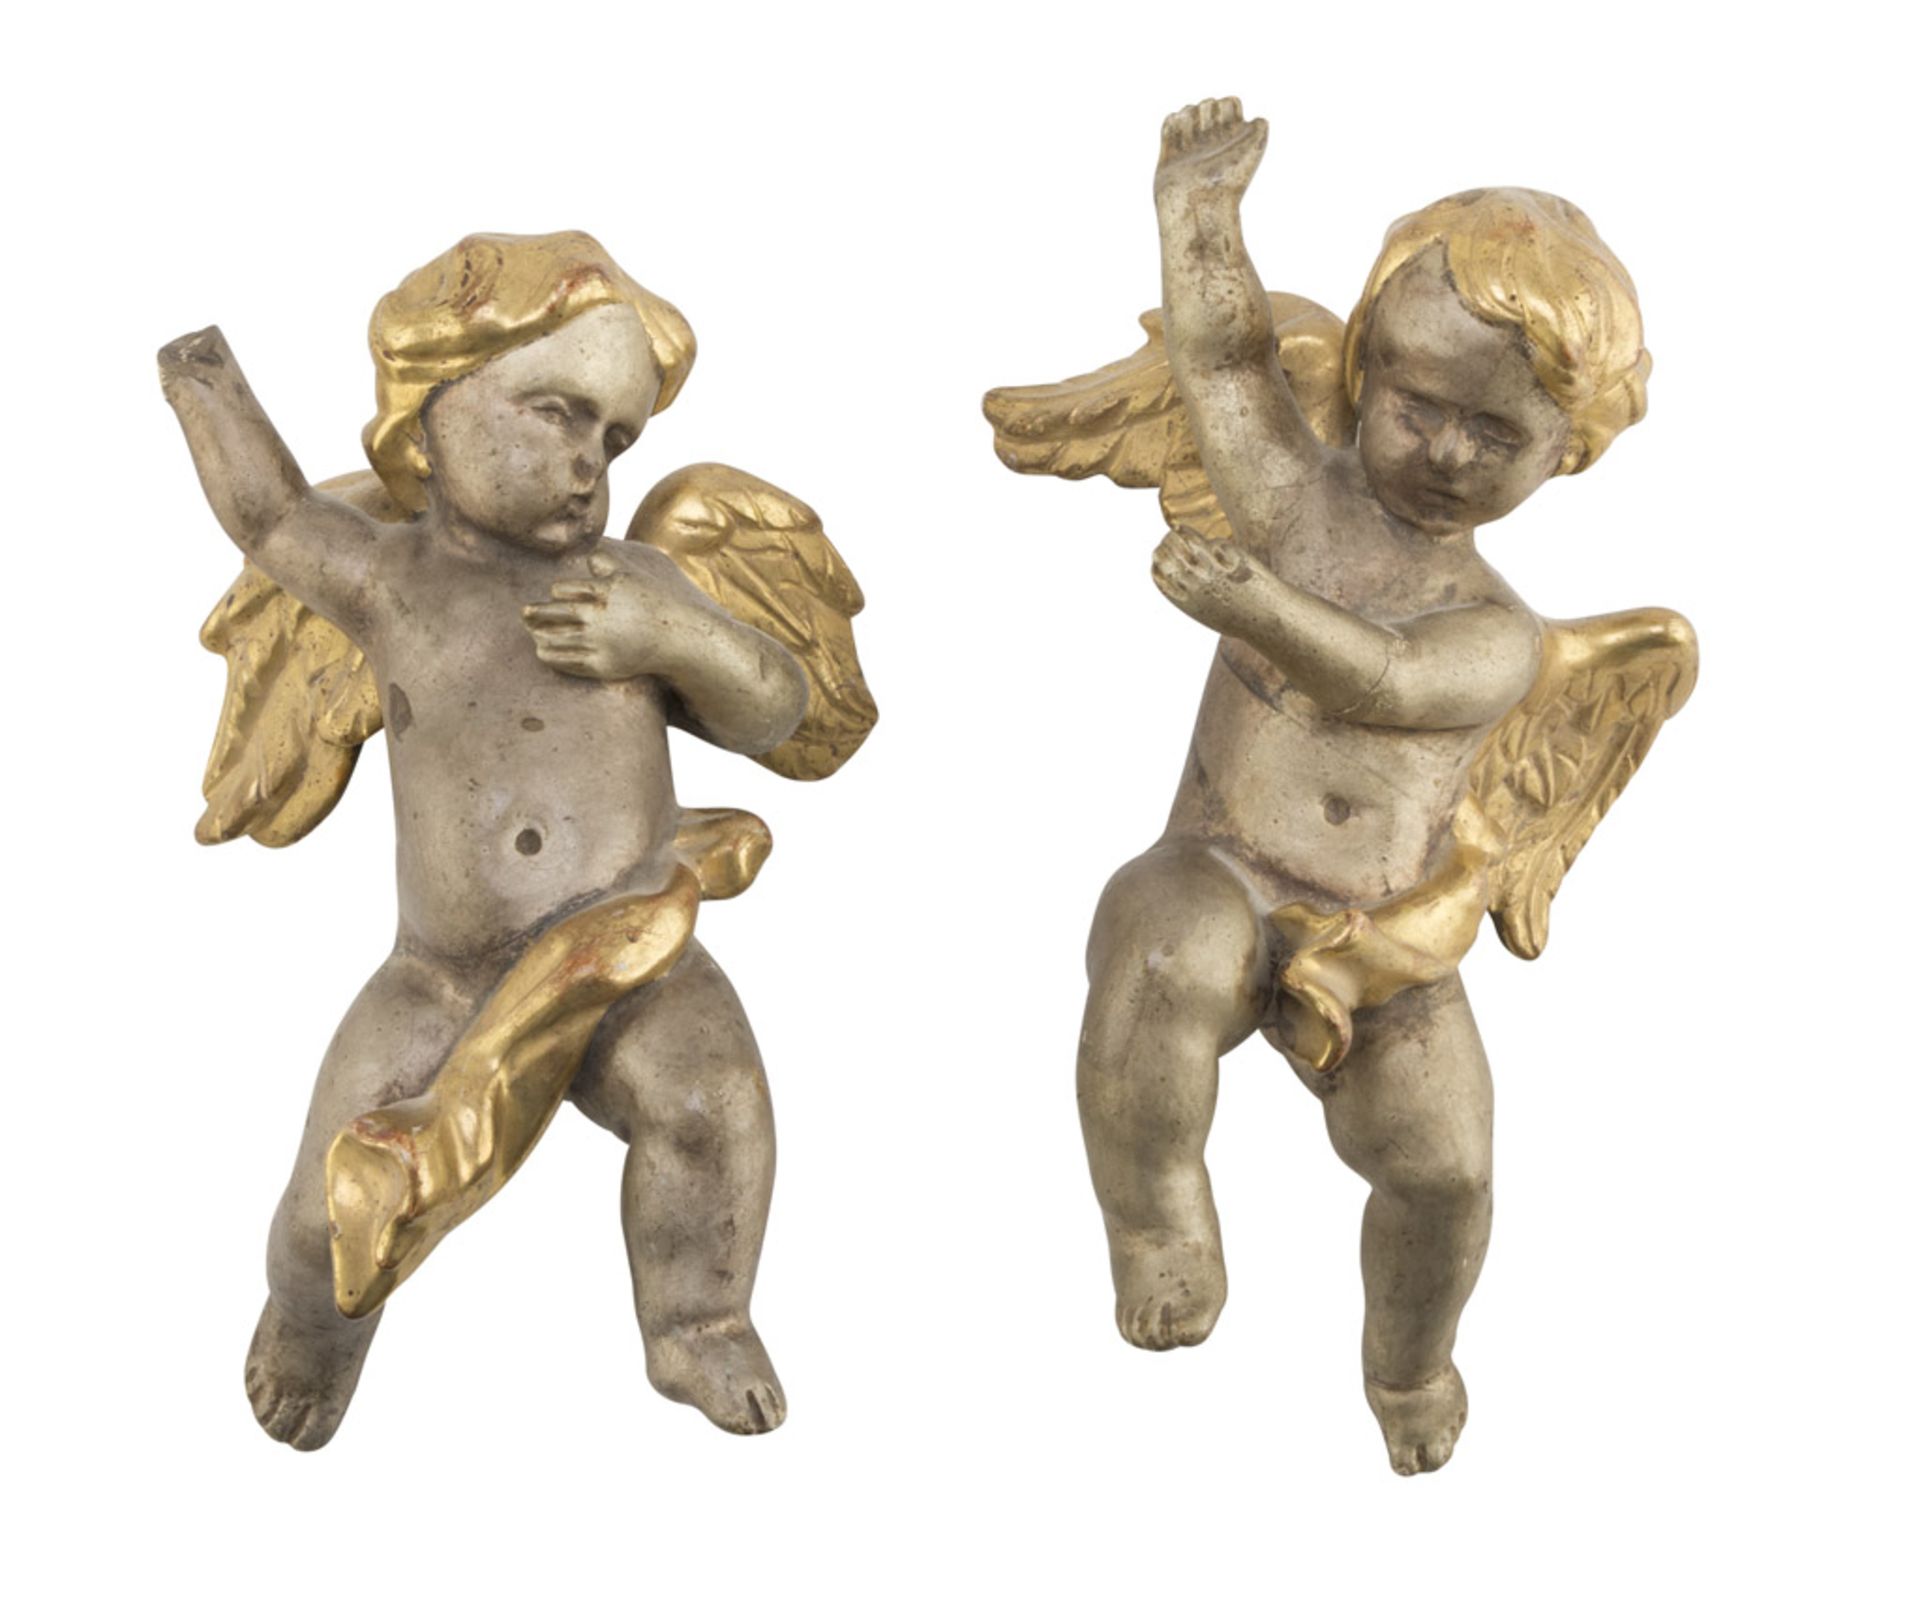 PAIR OF CHERUB SCULPTURES, 19TH CENTURY in giltwood. Measures cm. 24 x 14 x 8. A lacking hand.